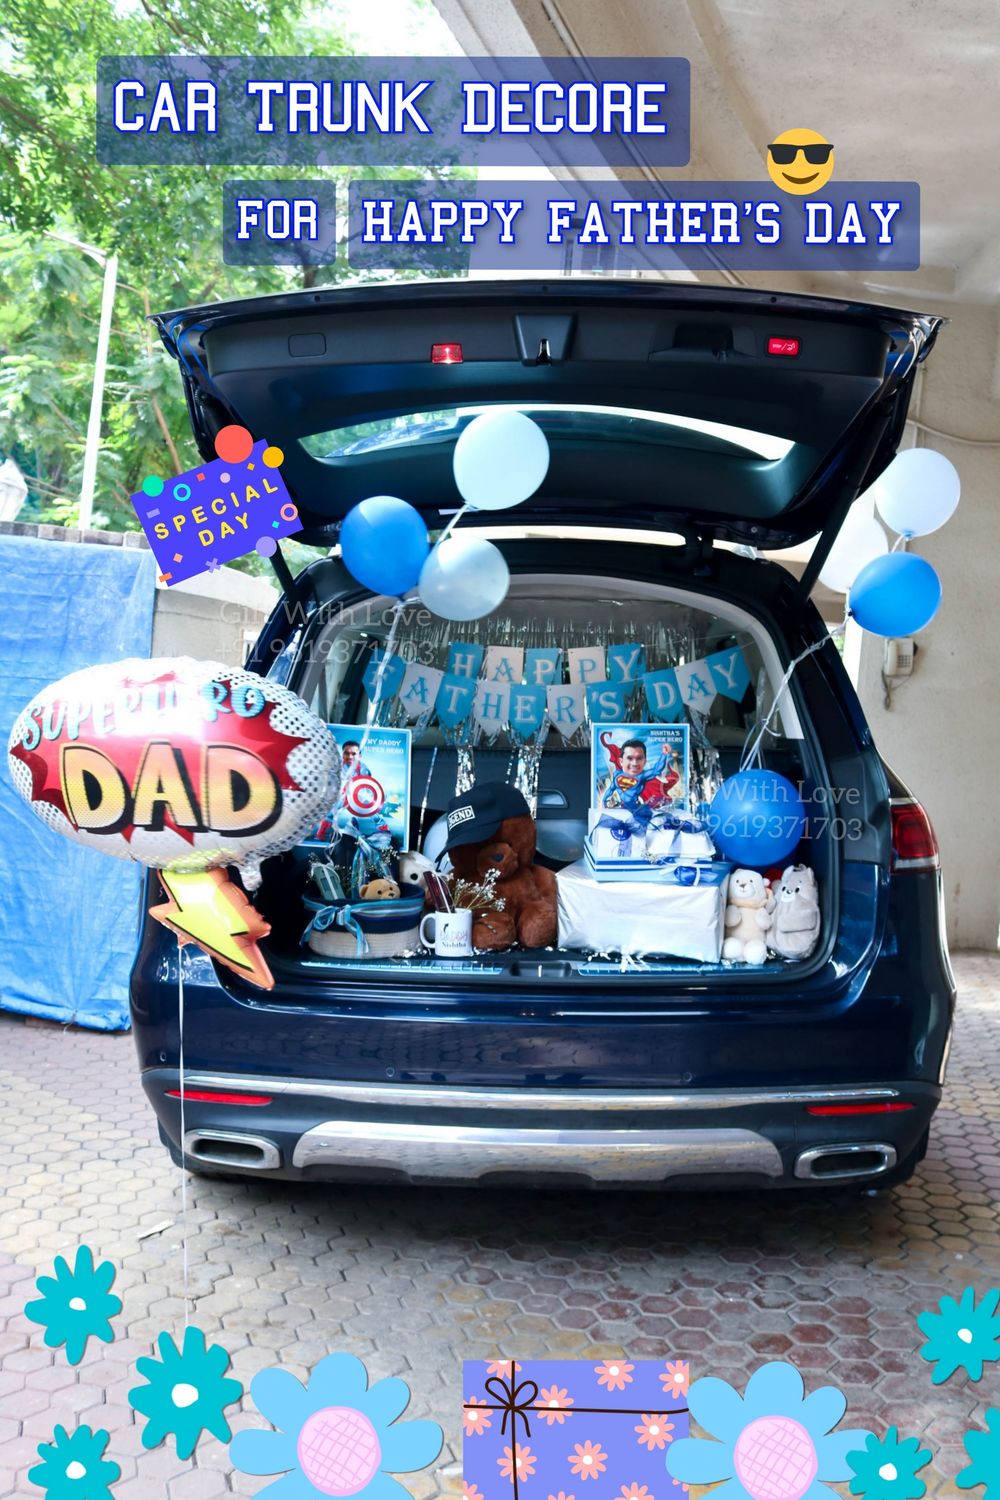 Photo From Car Trunk Decore - By Gift with Love